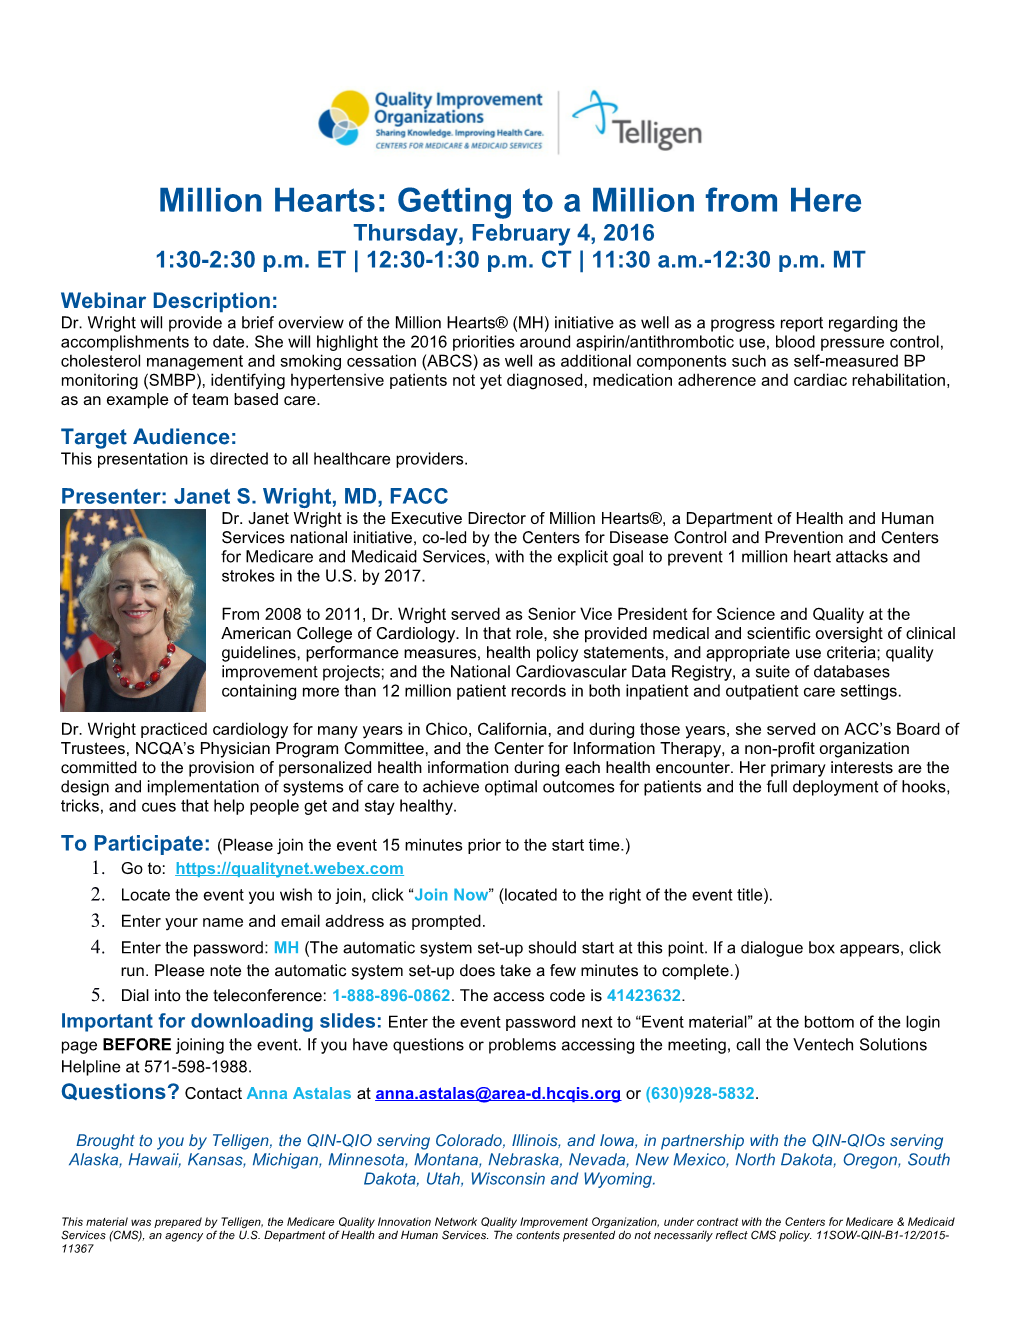 Million Hearts: Getting to a Million from Here